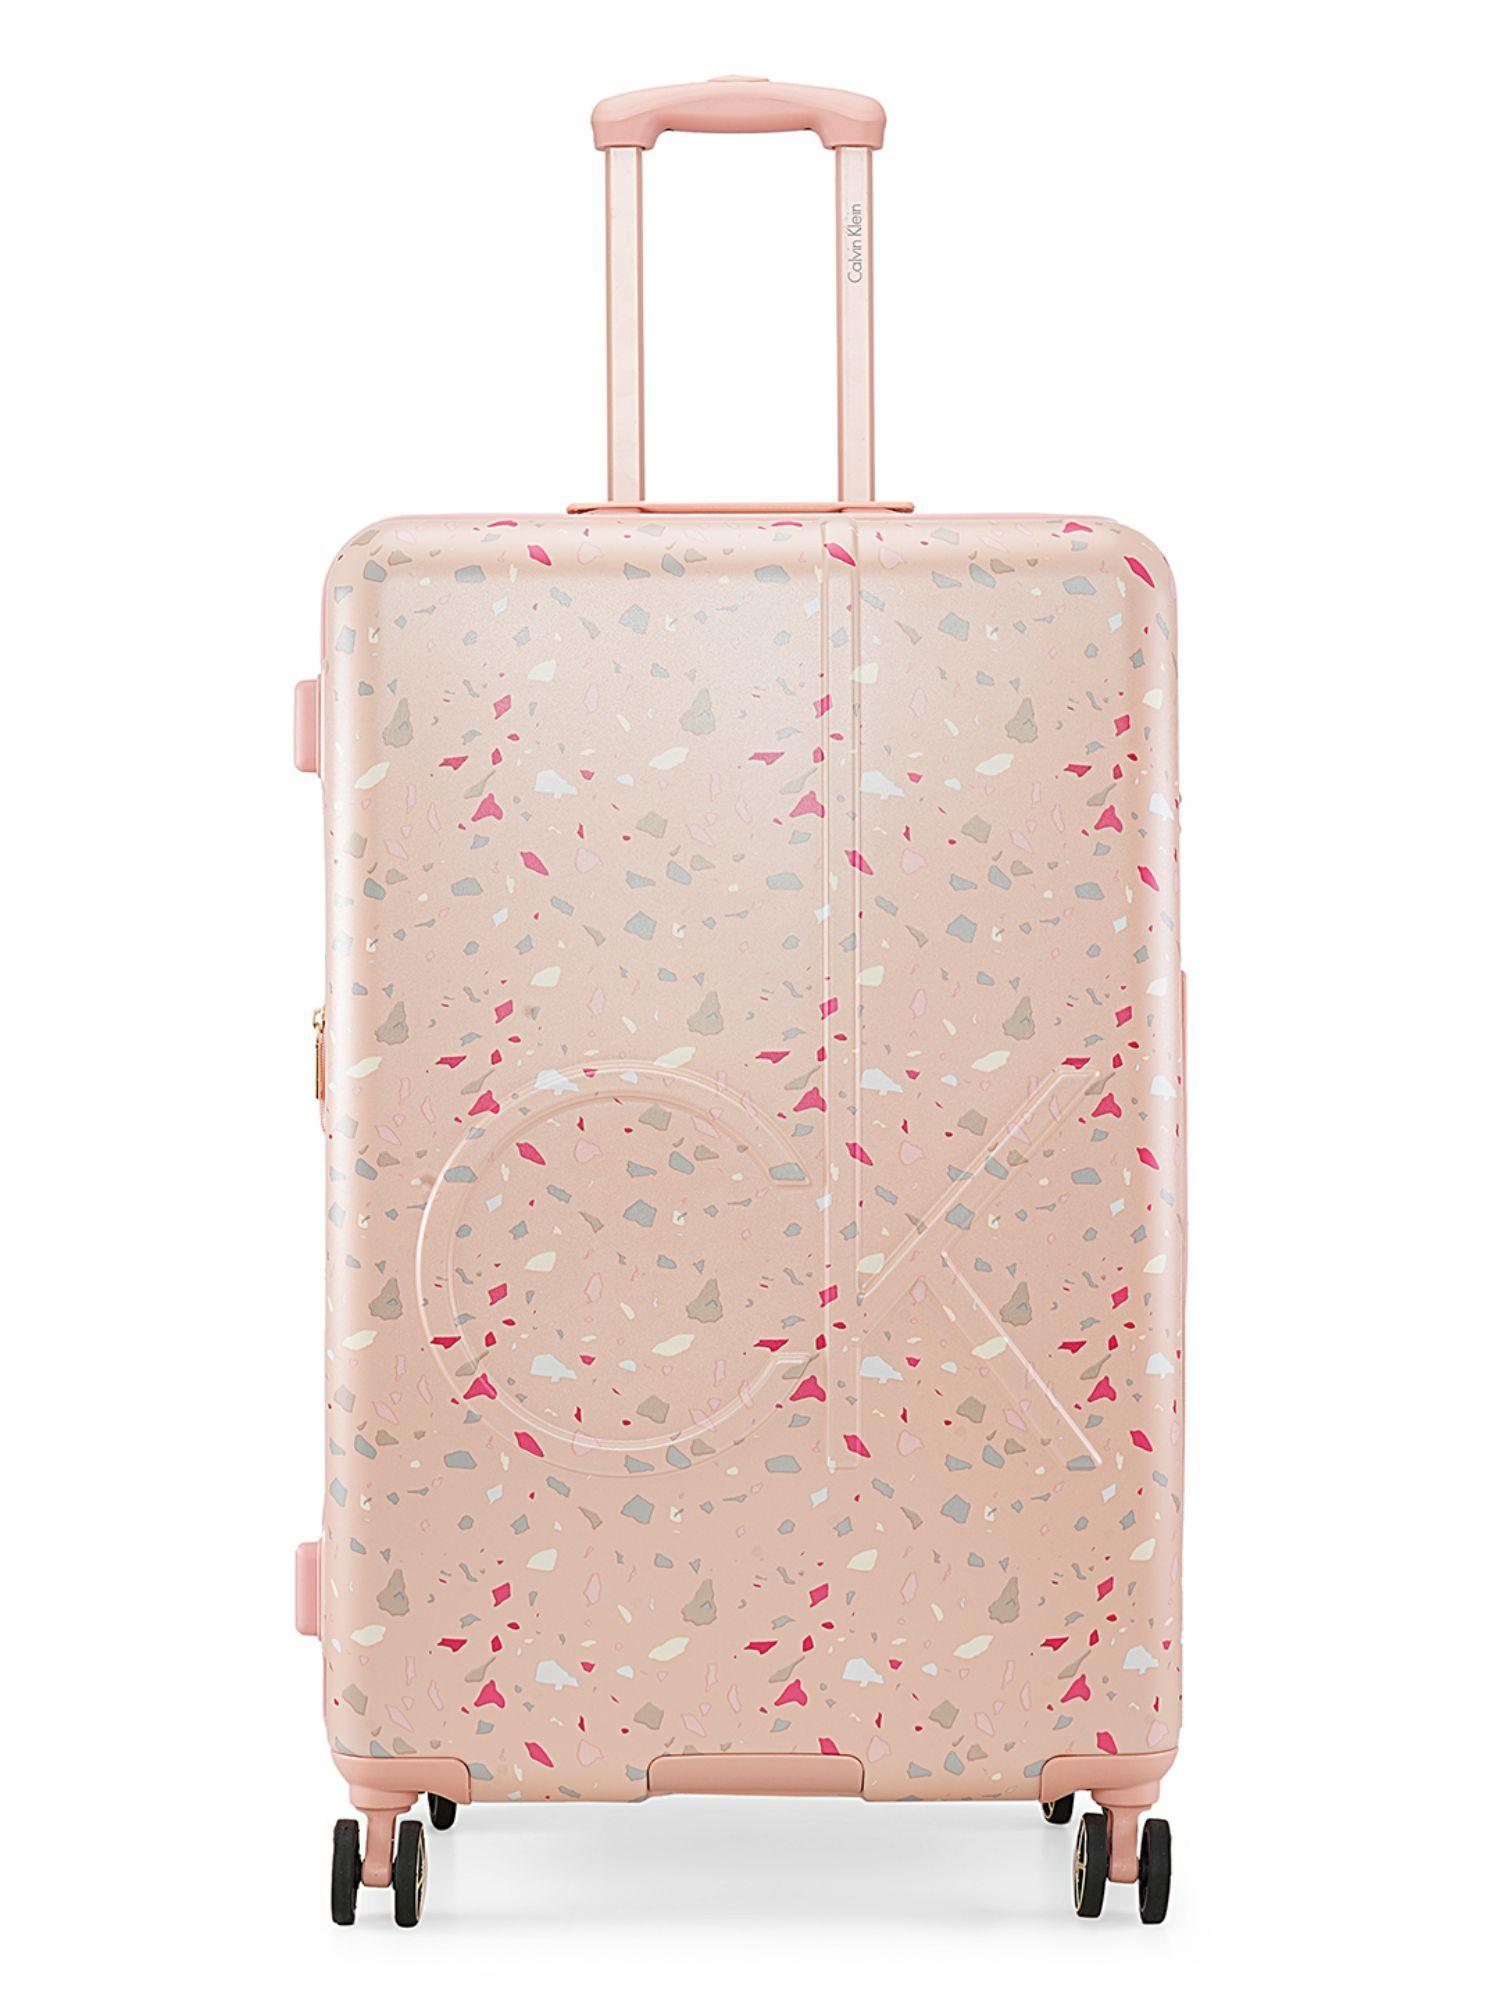 terrazzo island dusty pink color abs material hard 20 inches cabin size trolley